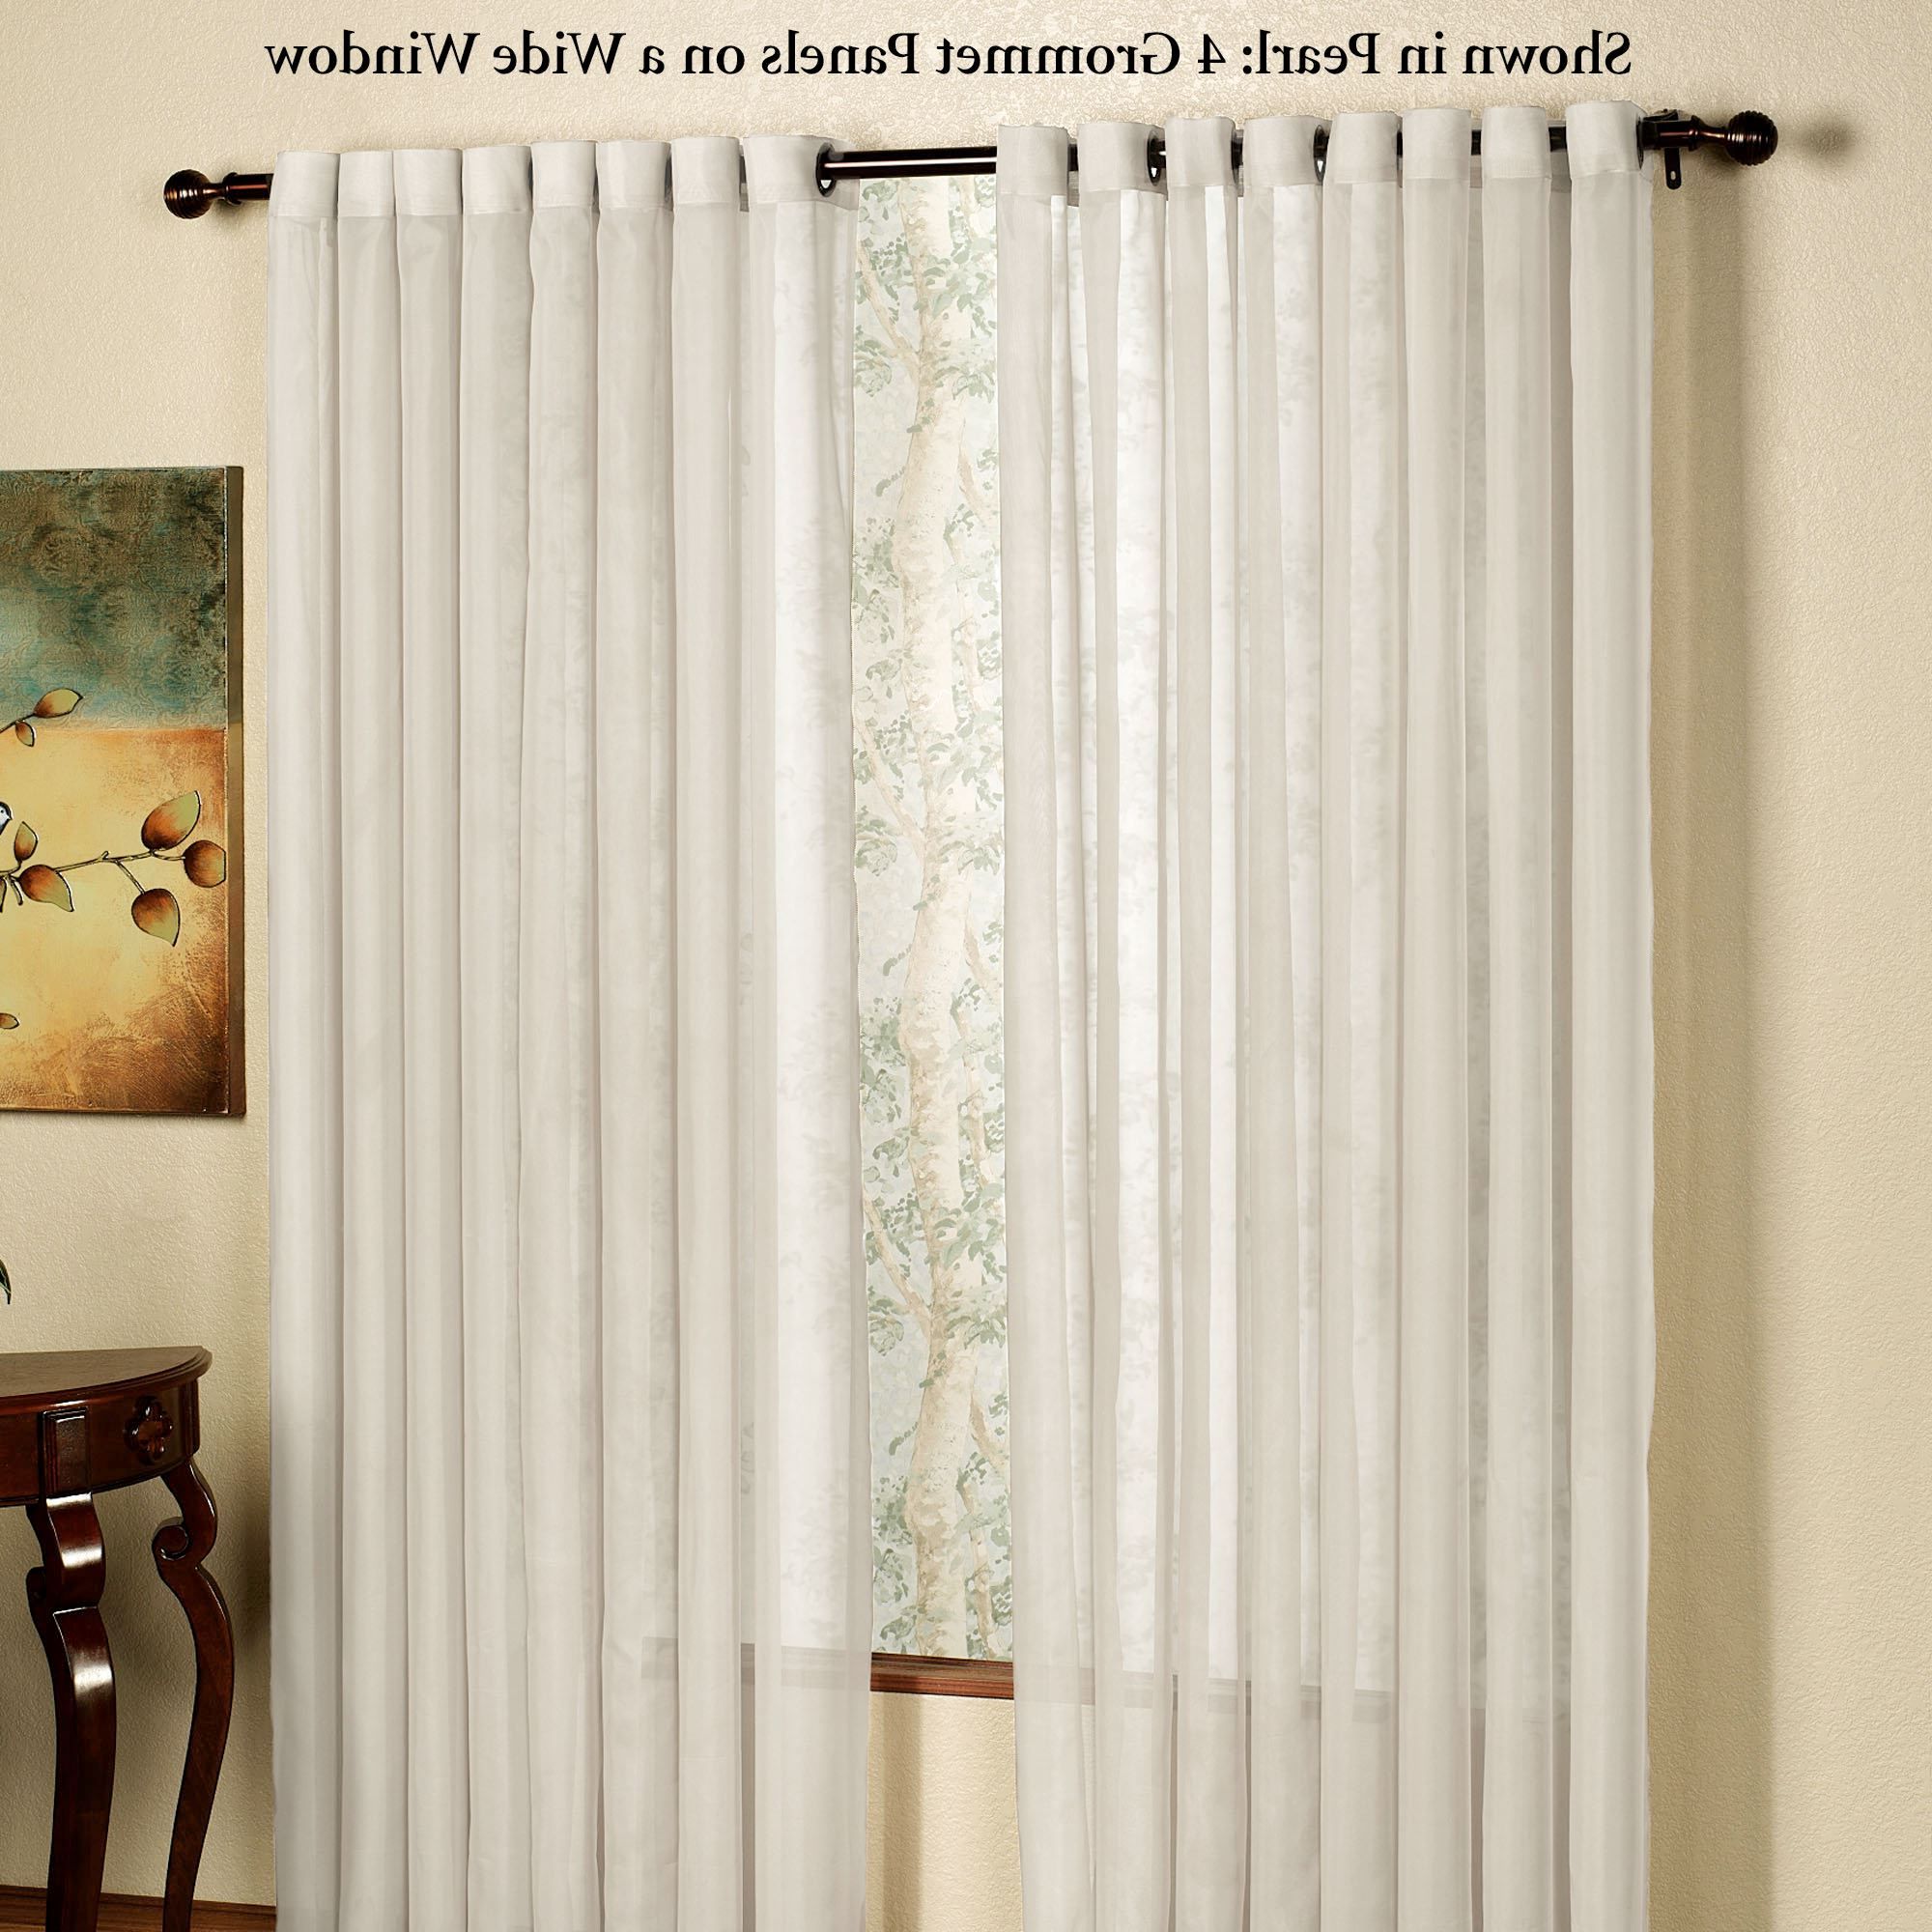 Widely Used Arm And Hammer Curtains Fresh Odor Neutralizing Single Curtain Panels Throughout Arm And Hammer 95" Curtain Fresh Odor Neutralizing Curtain Panel 59 X  (View 10 of 20)